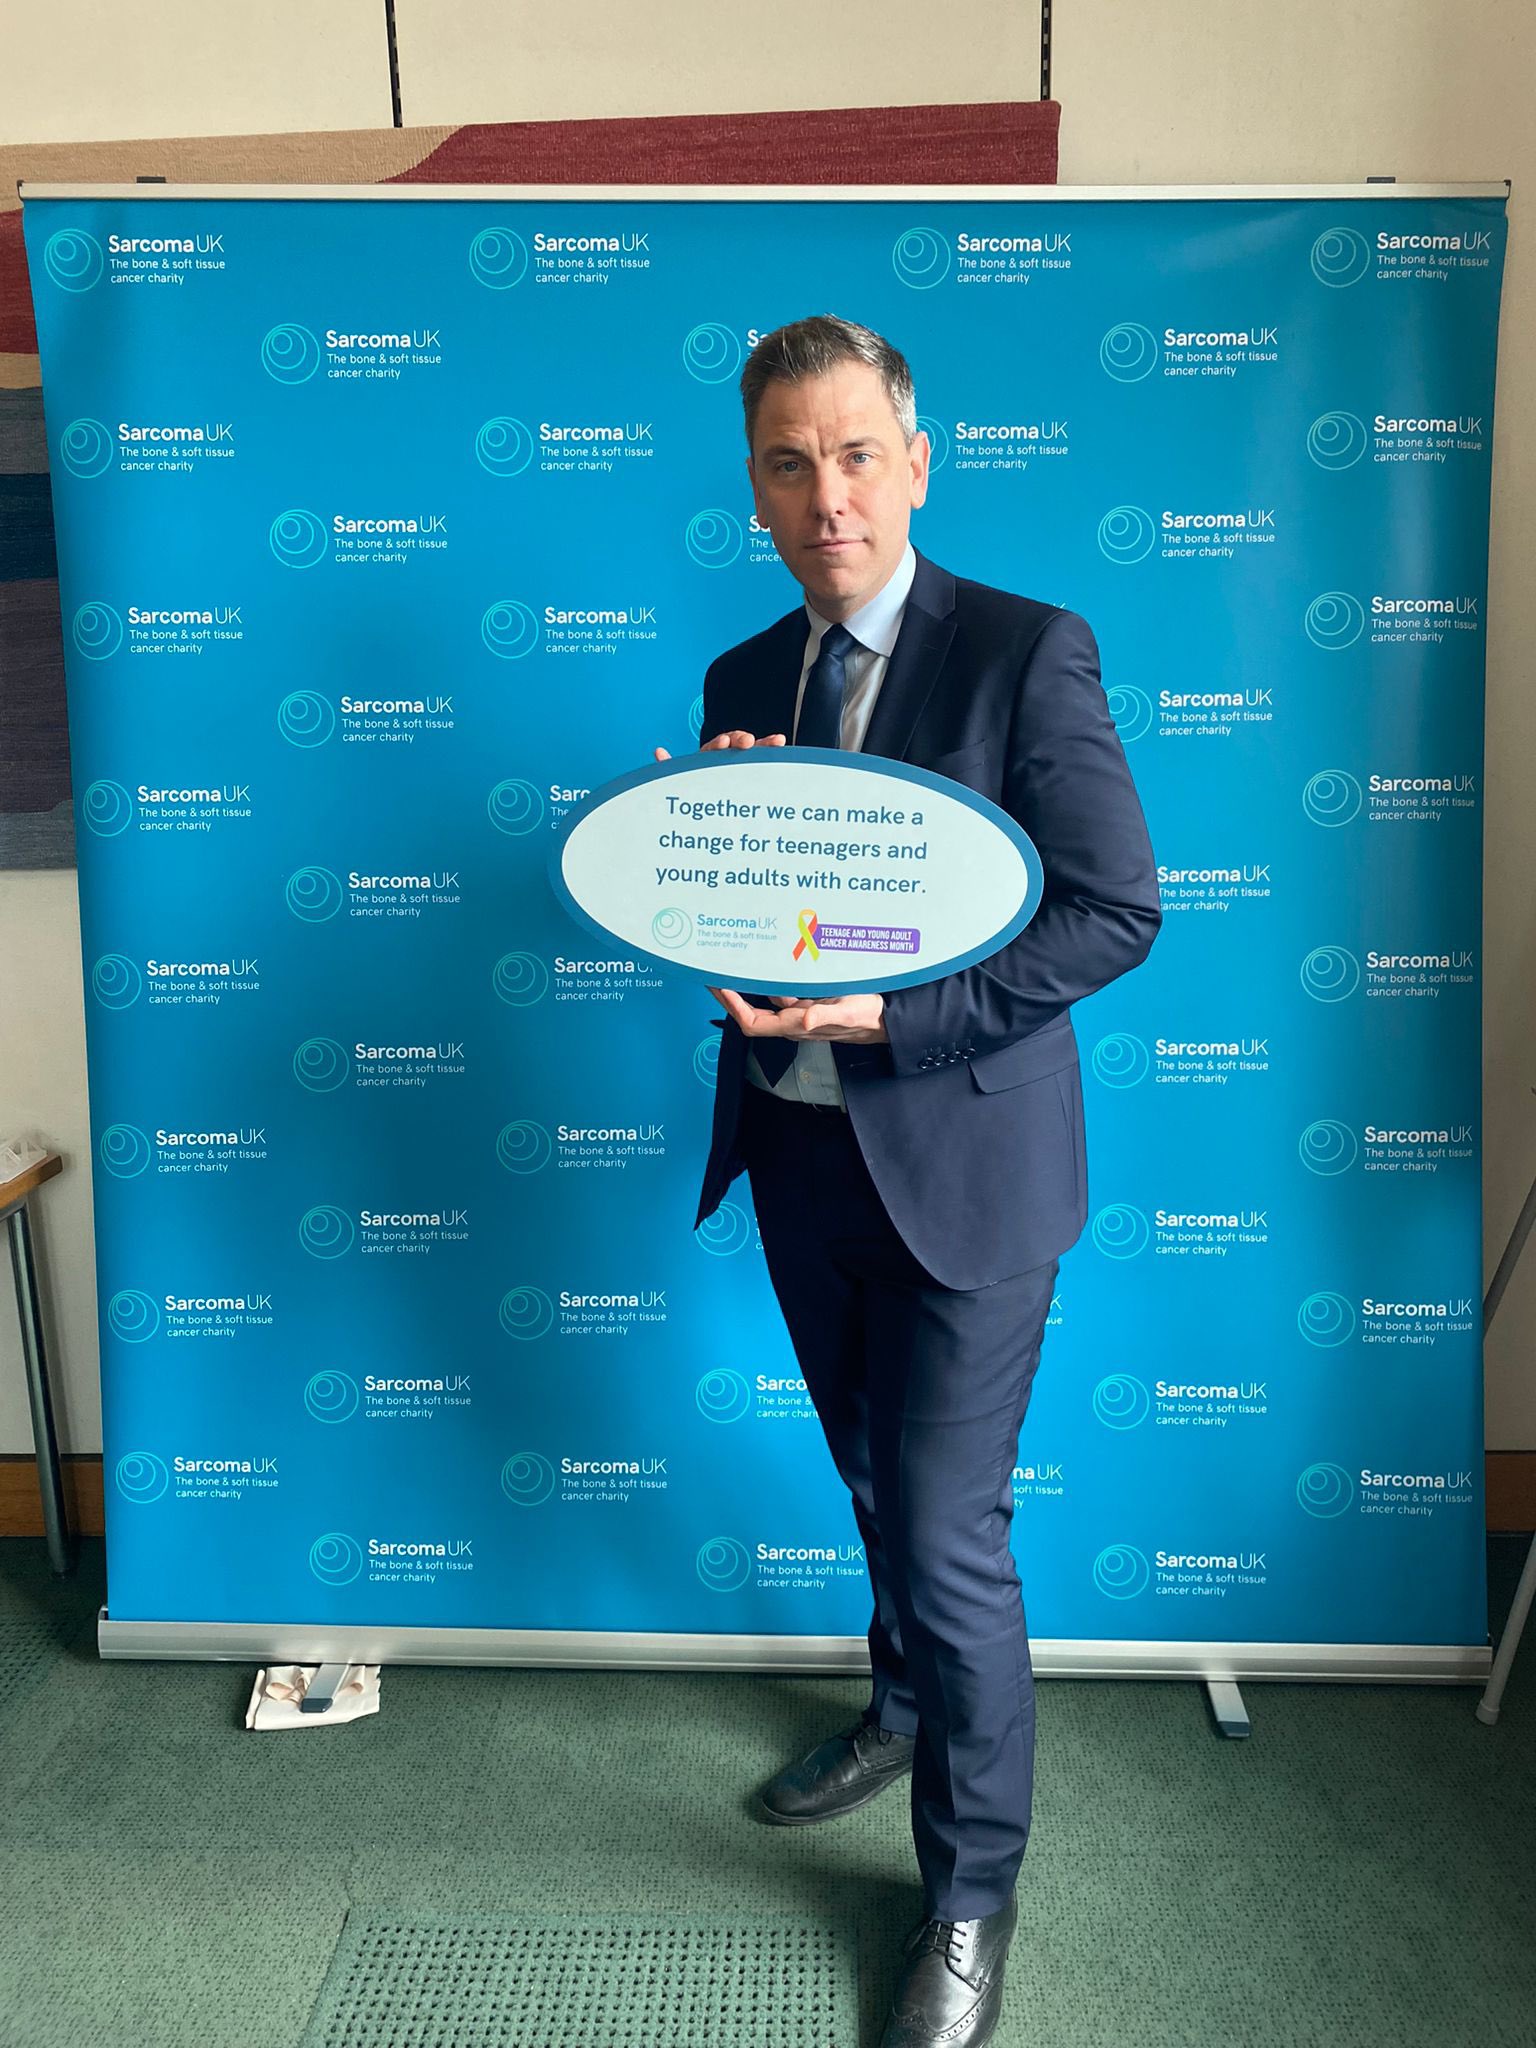 Chris Evans MP is holding a light blue sign with dark blue lettering, that reads: together we can make a change for teenagers and young adults with cancer